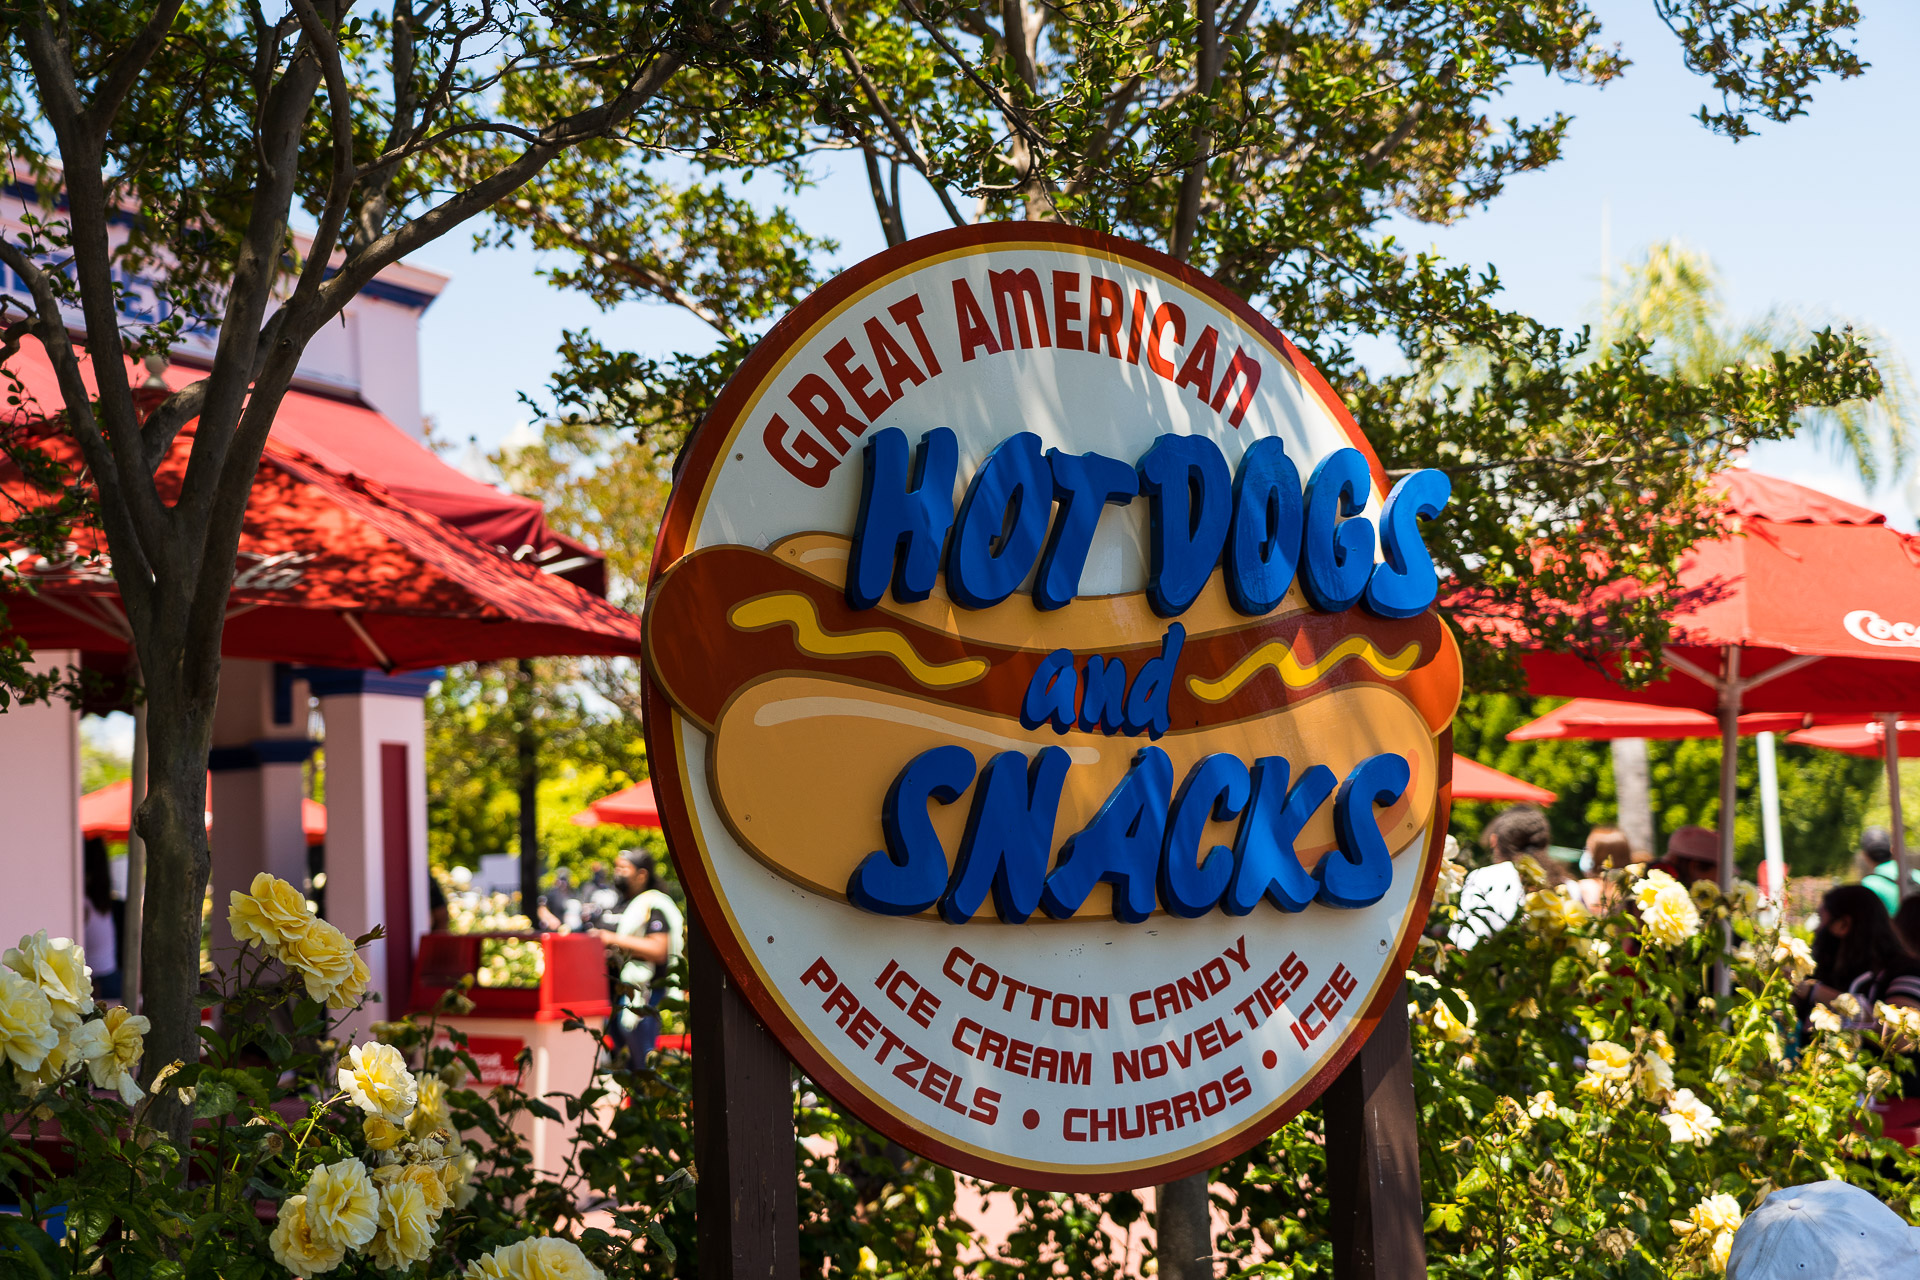 Great American Hot Dogs and Snacks